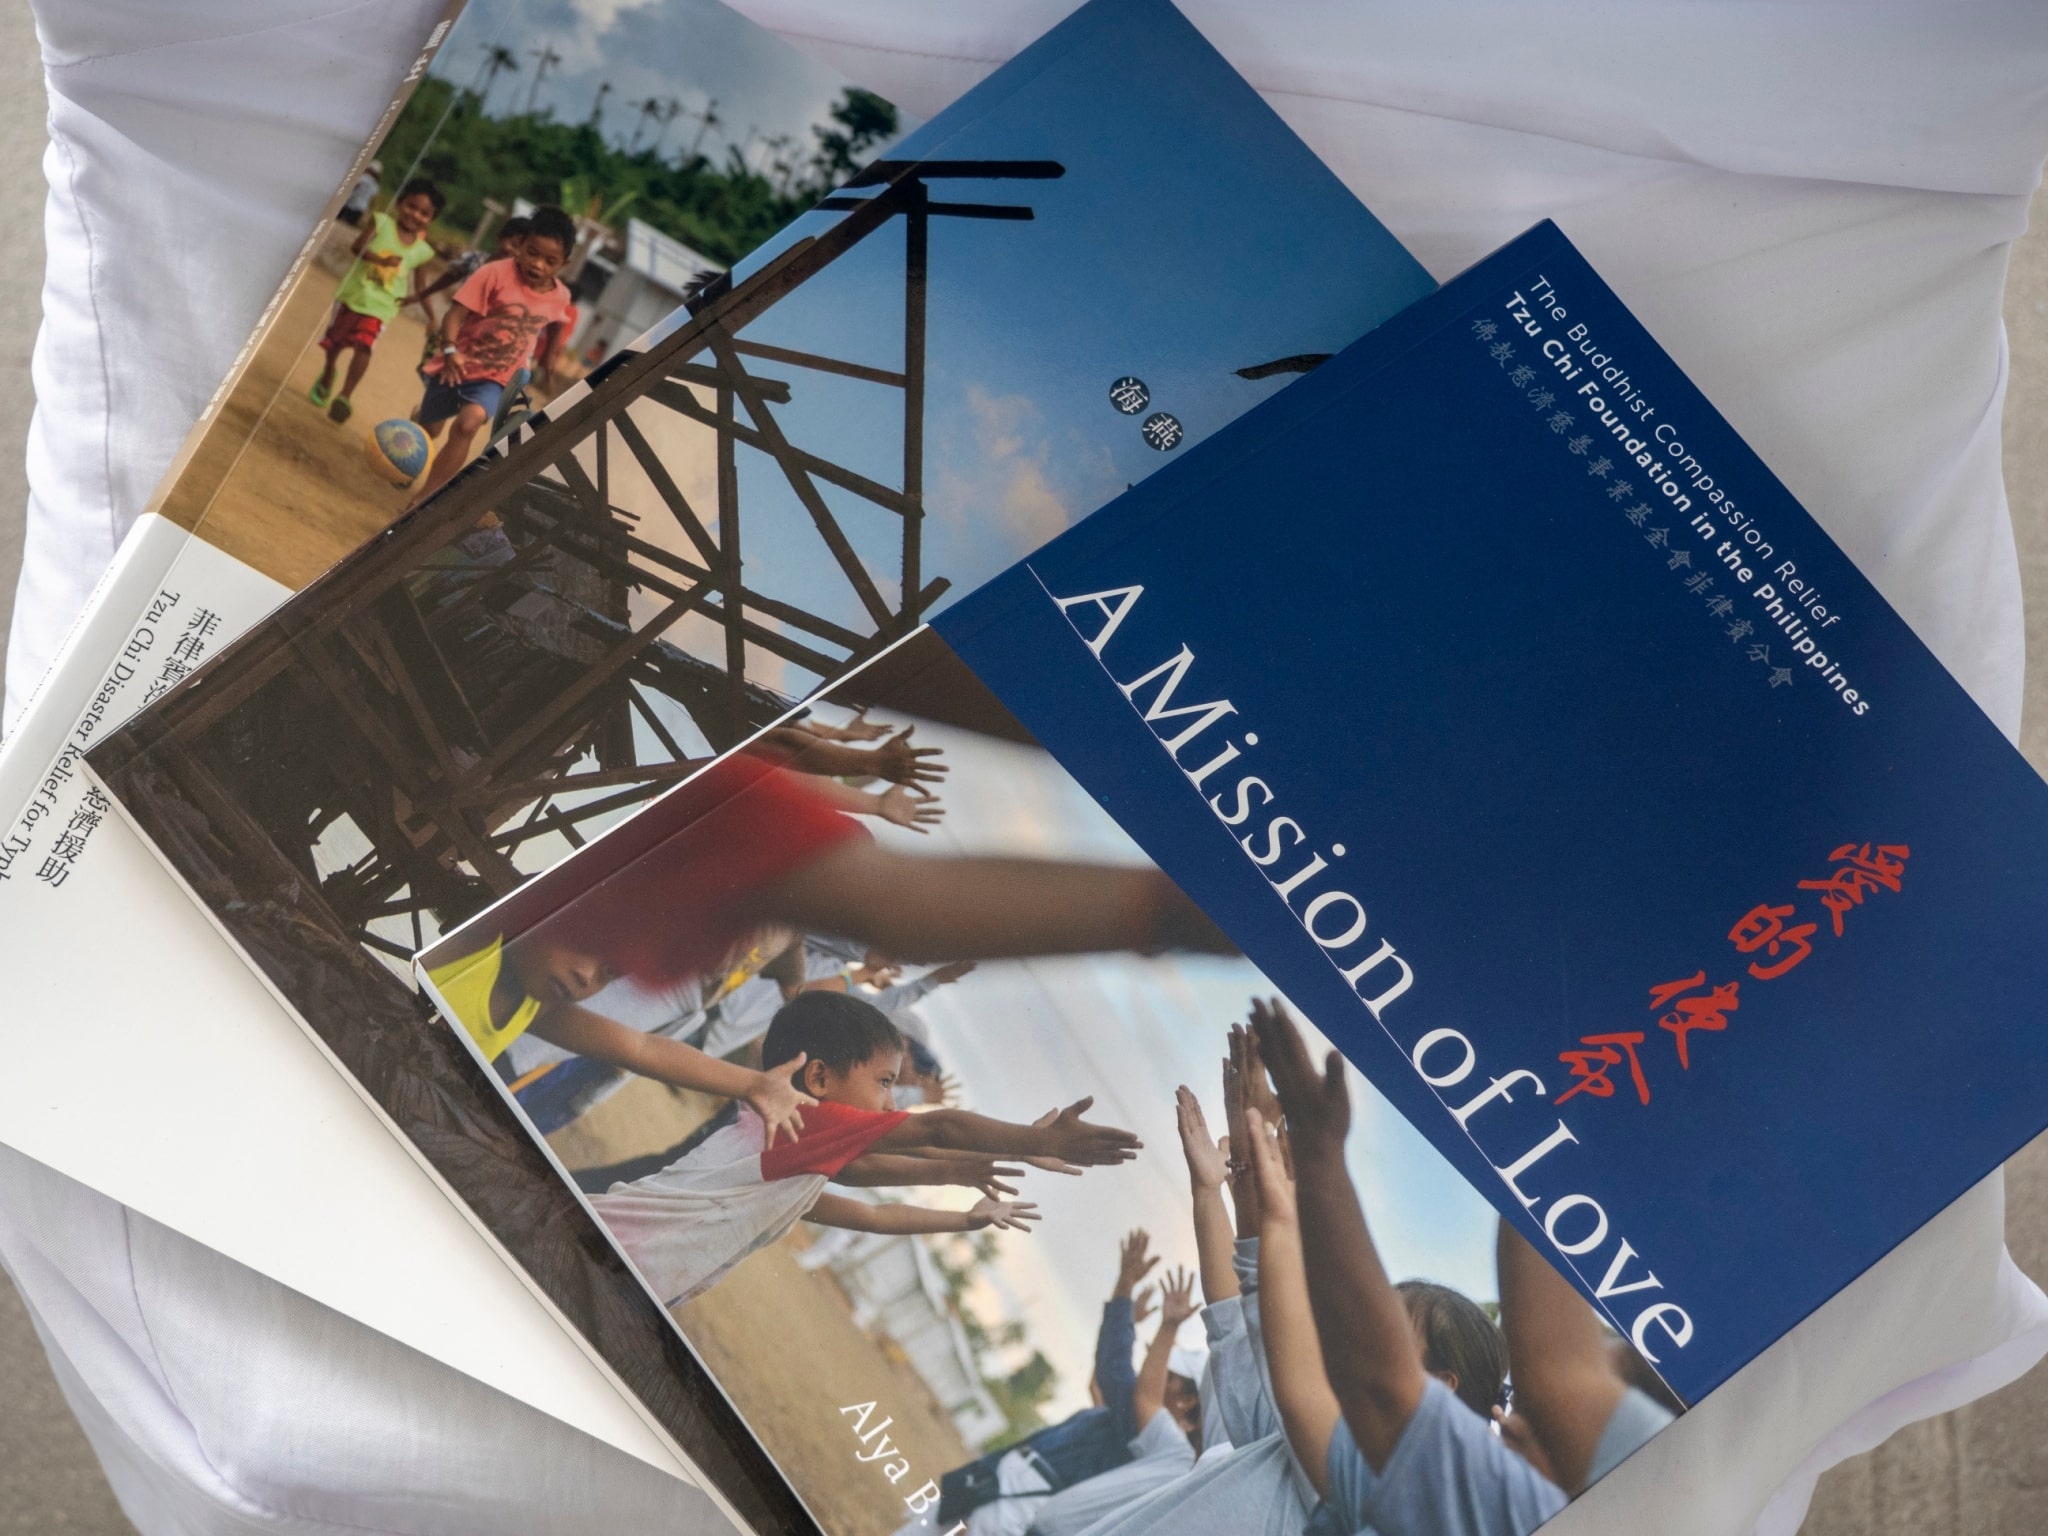 Tzu Chi gives copies of “A Mission of Love,” “Resurgence,” and “Yolanda in Focus” as a token of appreciation for the partner institutions. 【Photo by Matt Serrano】